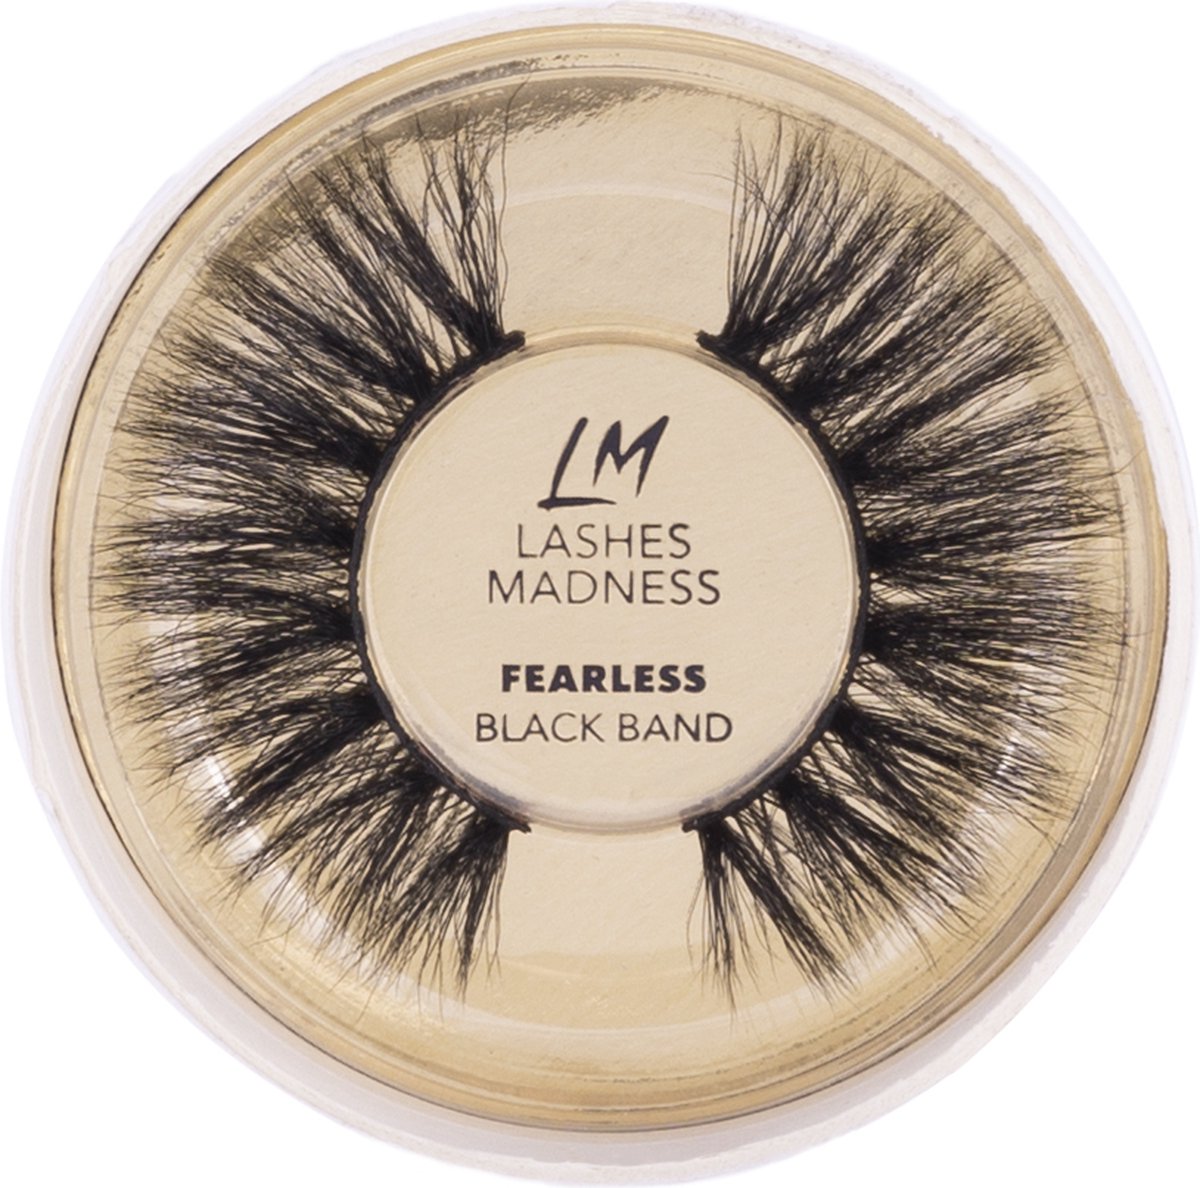 Lashes Madness - FEARLESS - Black Band - Vegan Mink Lashes - Wimpers - Valse Wimpers - Eyelashes - Luxe Wimpers